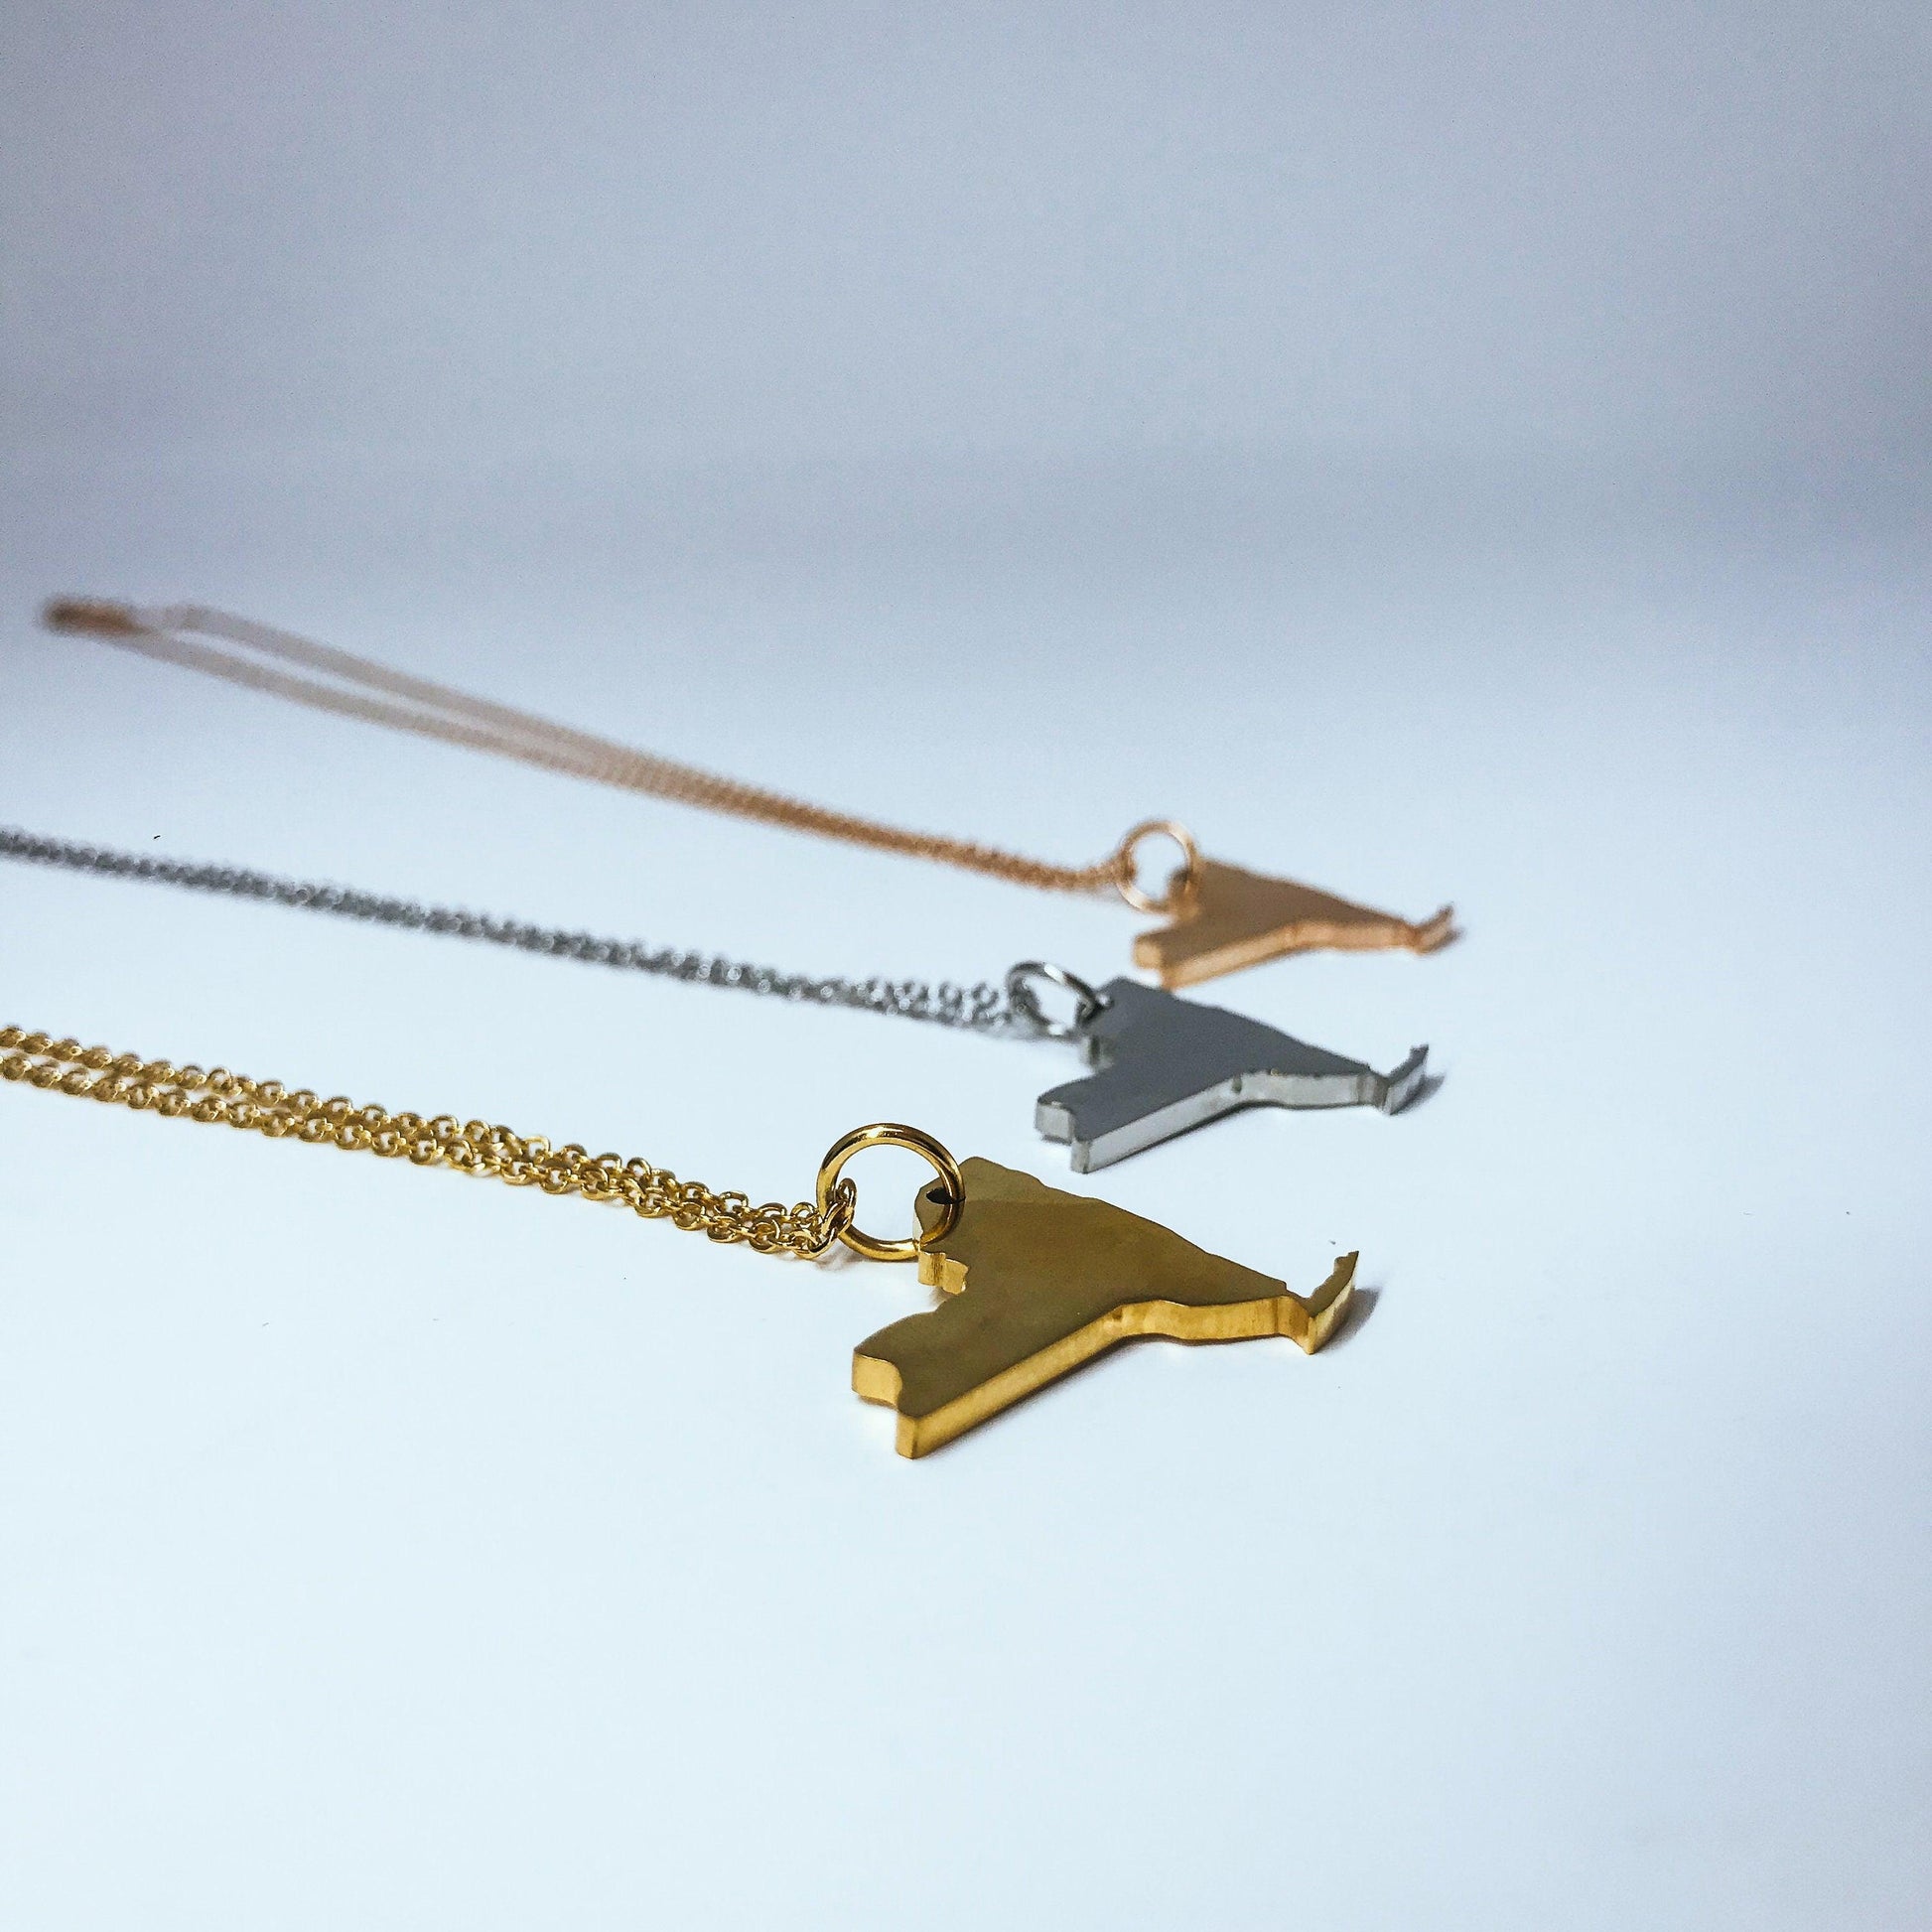 New York State Silhouette Necklaces in 3 different colors: Gold, Silver & Rose Gold